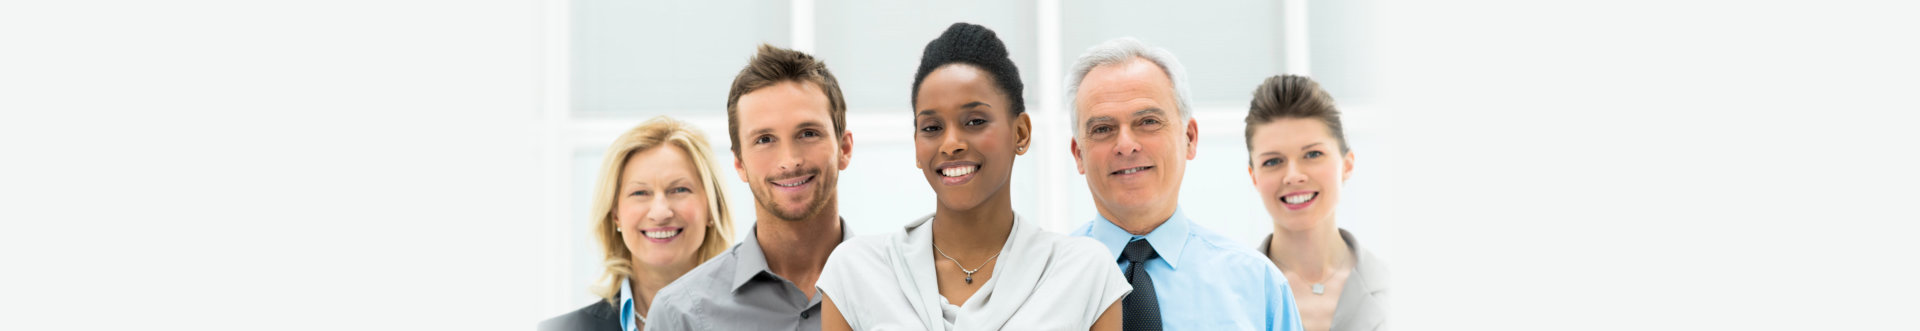 Smiling multi ethnic business team with copy space